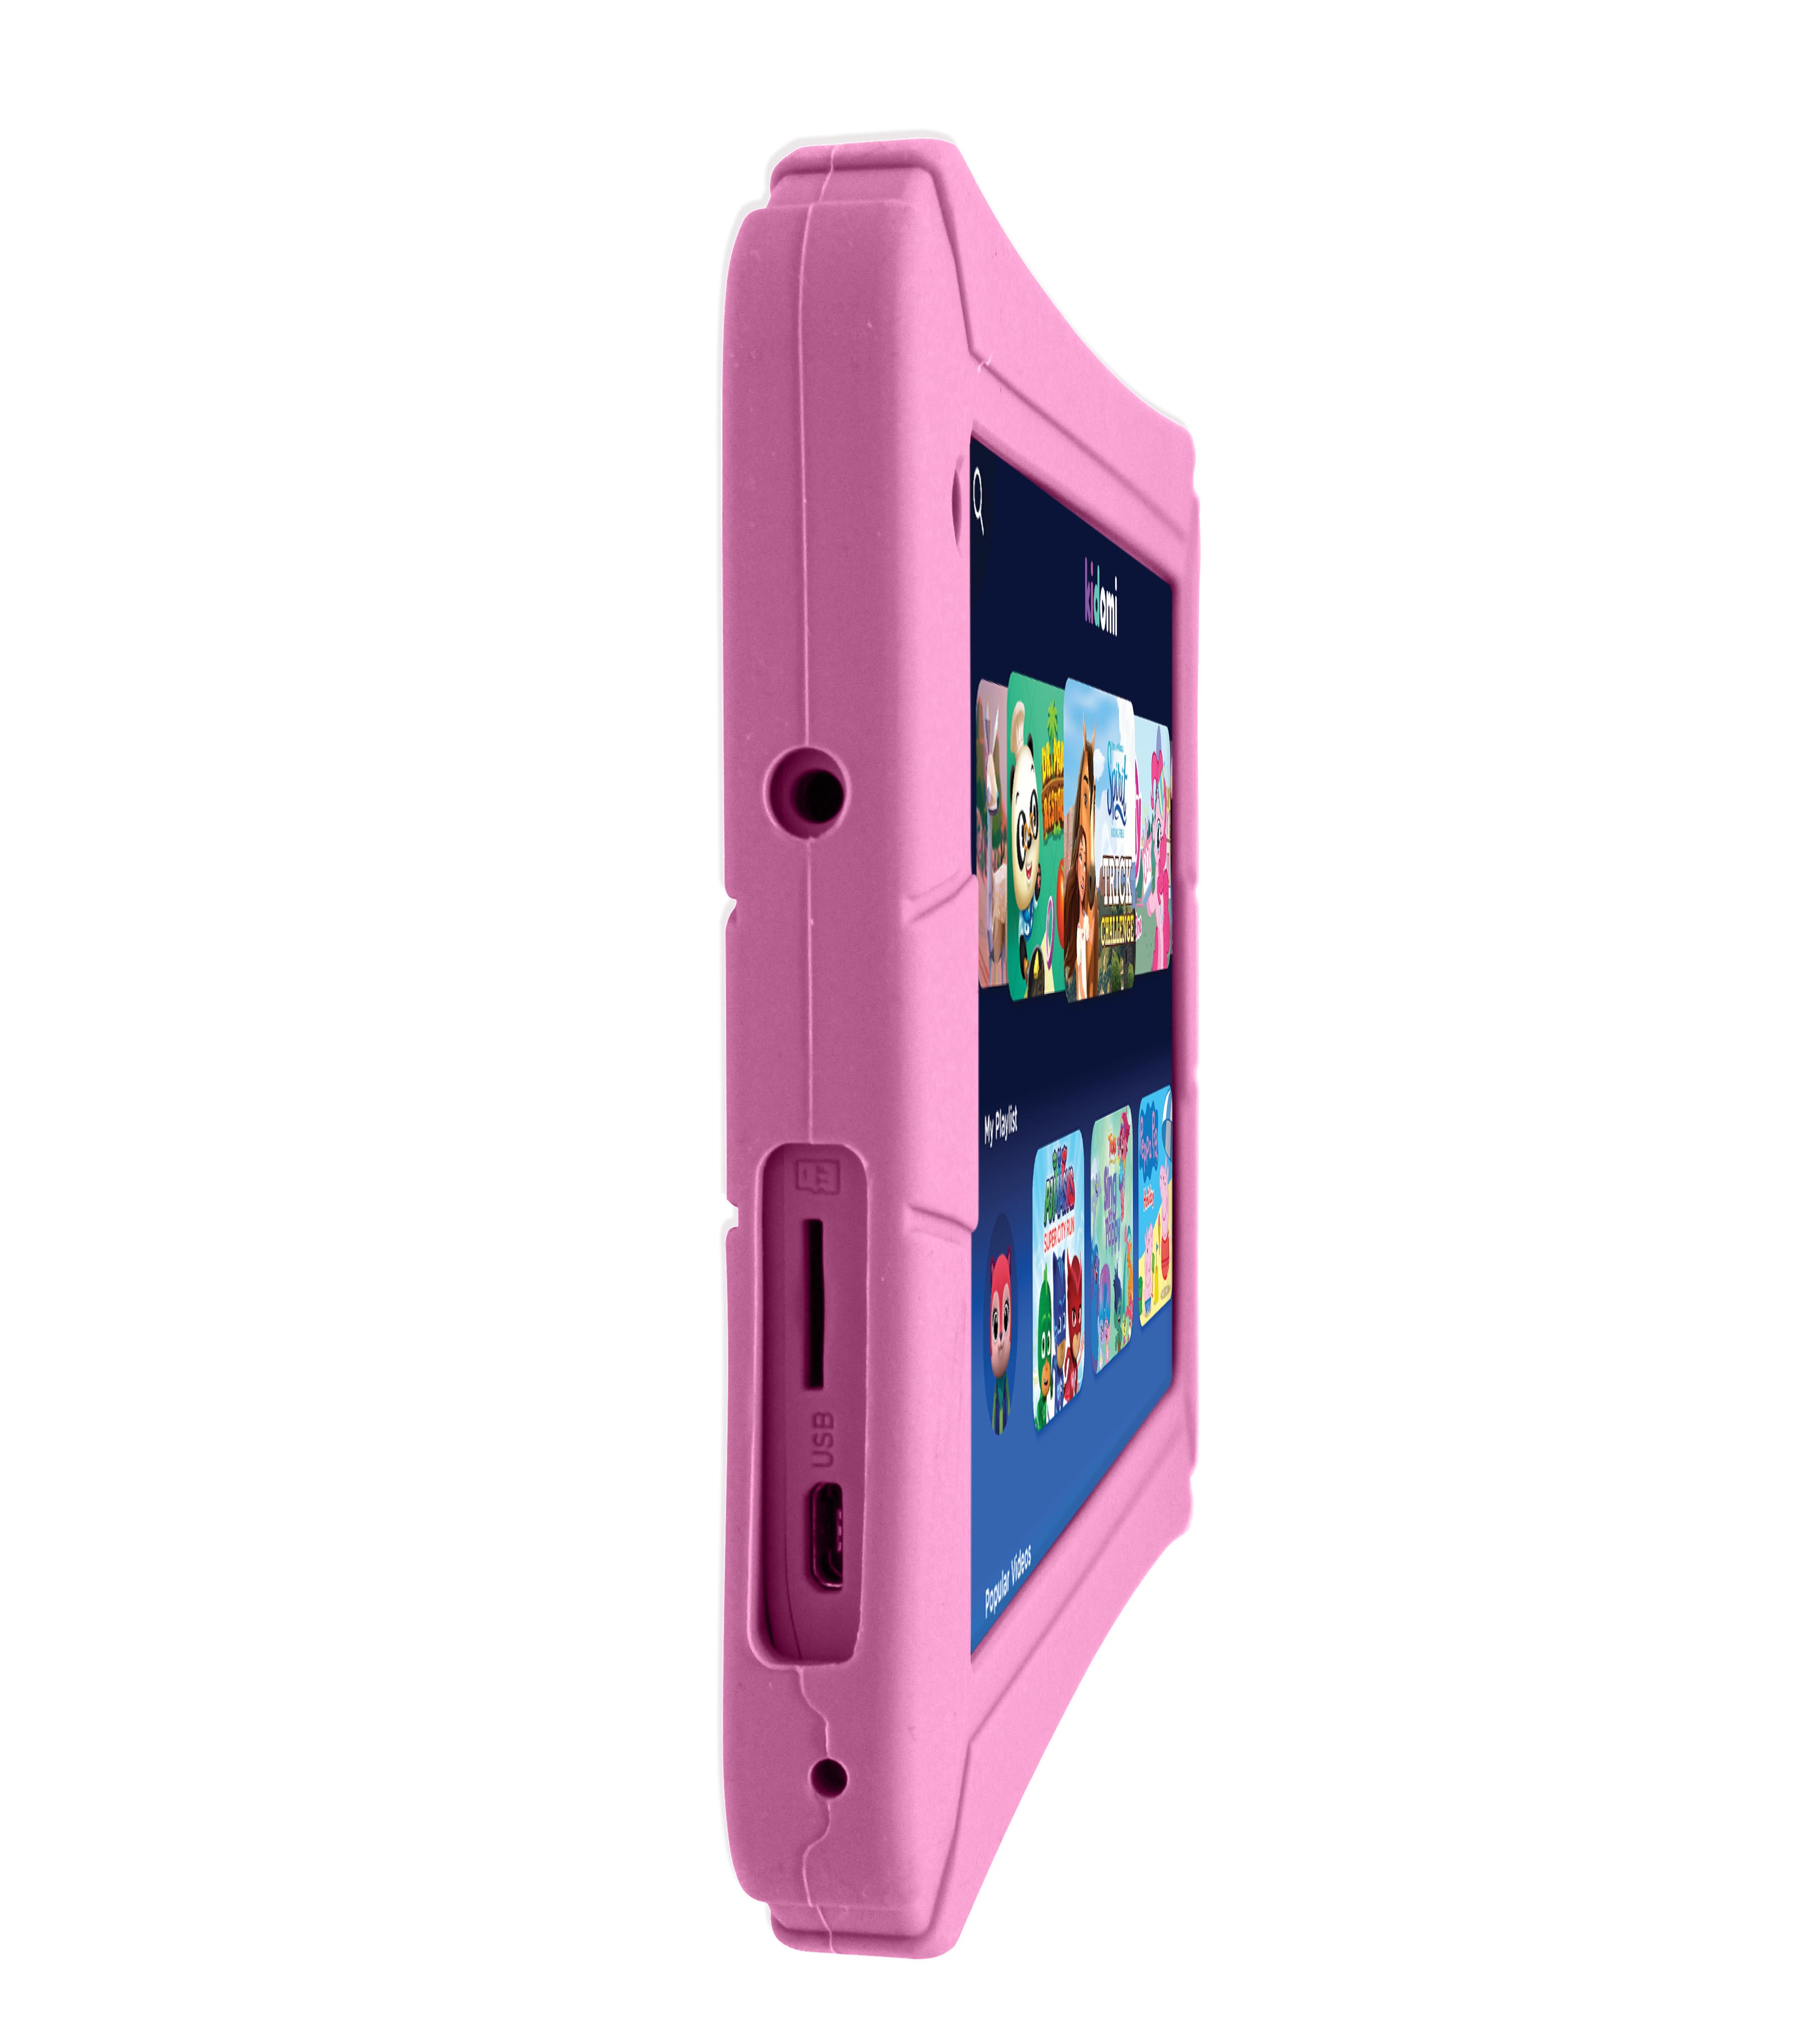 HighQ 7" Learning Tab Jr. featuring Kidomi, Gel Case Included, Quad Core Processor, 8GB Storage, Android 8.1 Go Edition, Dual Cameras, Kidomi Free Trial Included, Pink - image 4 of 6